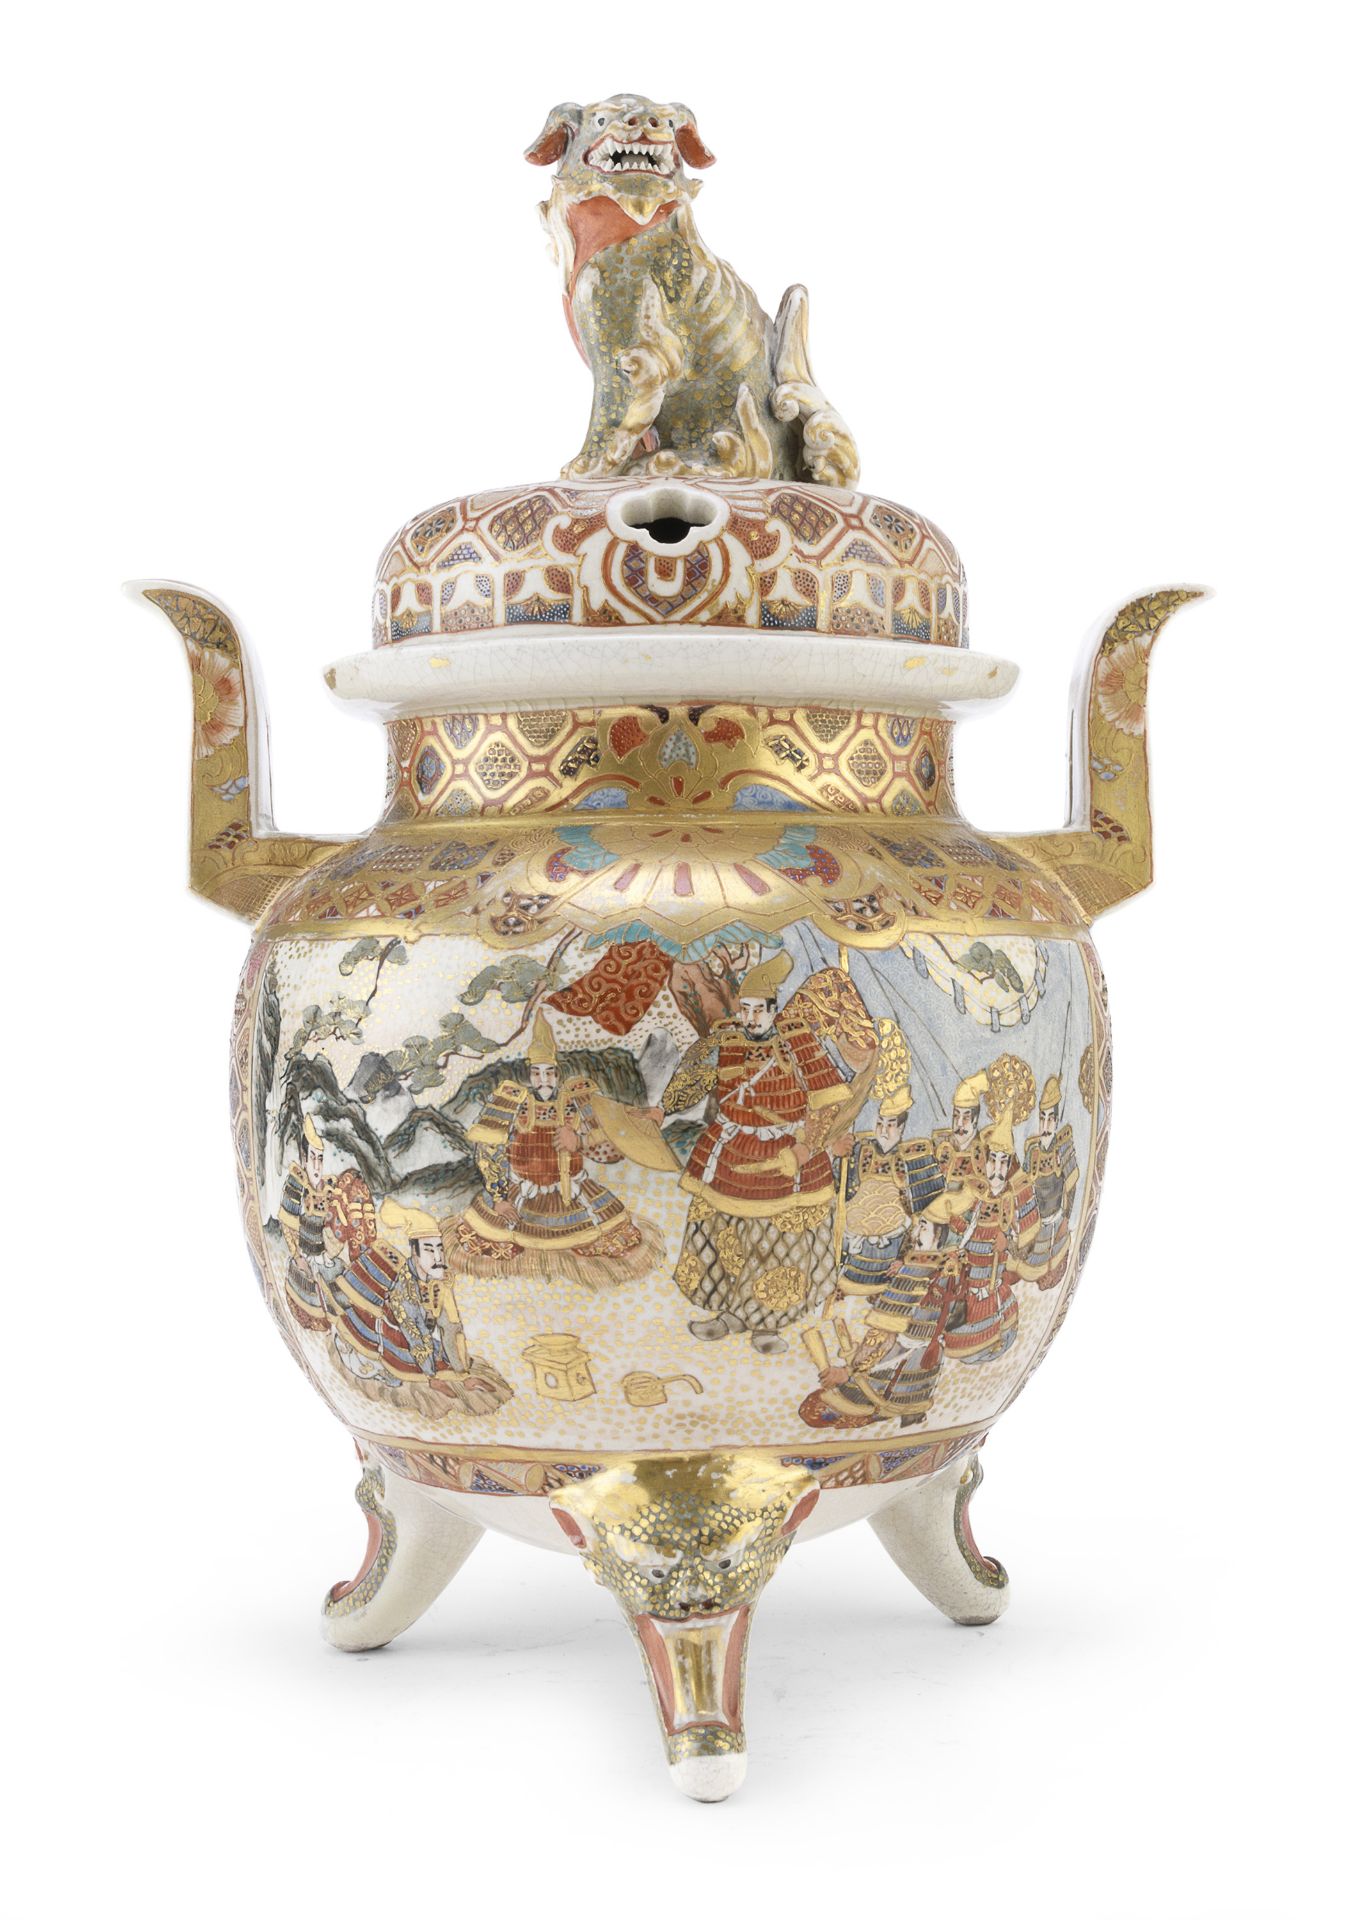 LARGE CERAMIC CENSER WITH POLYCHROME ENAMELS AND GOLD JAPAN LATE 19TH CENTURY